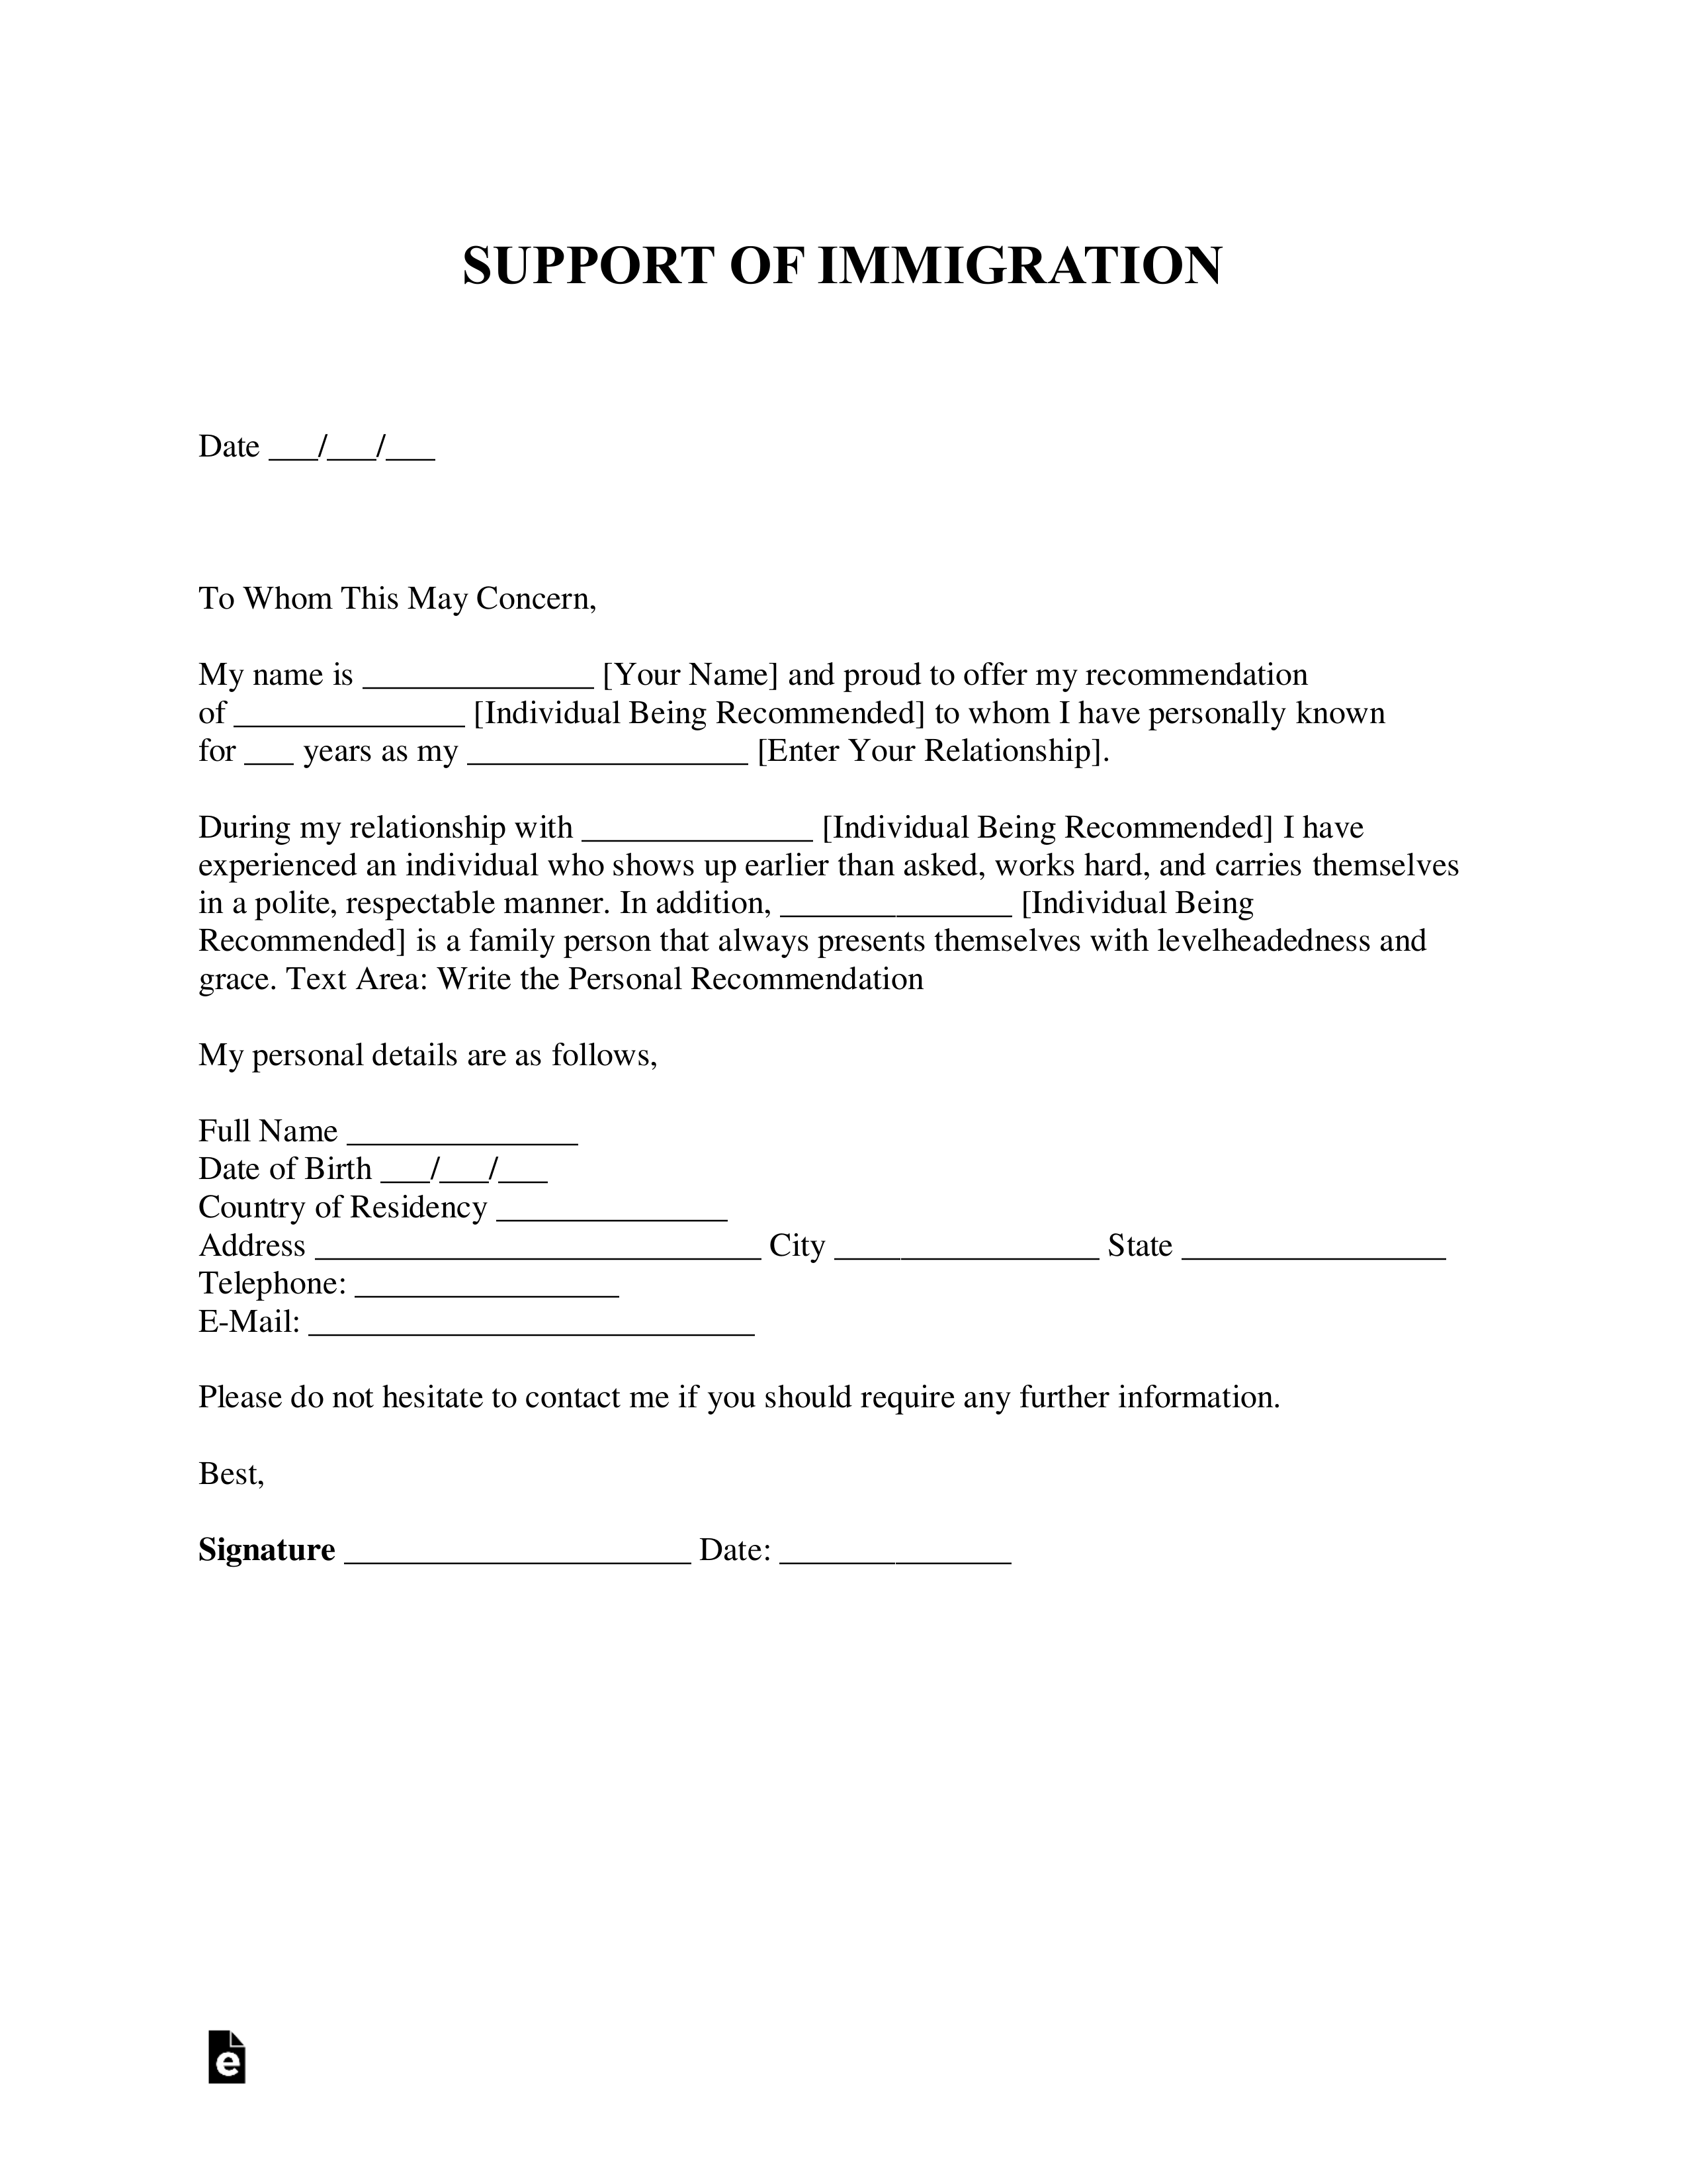 Hardship Letter For Immigration For My Husband from eforms.com